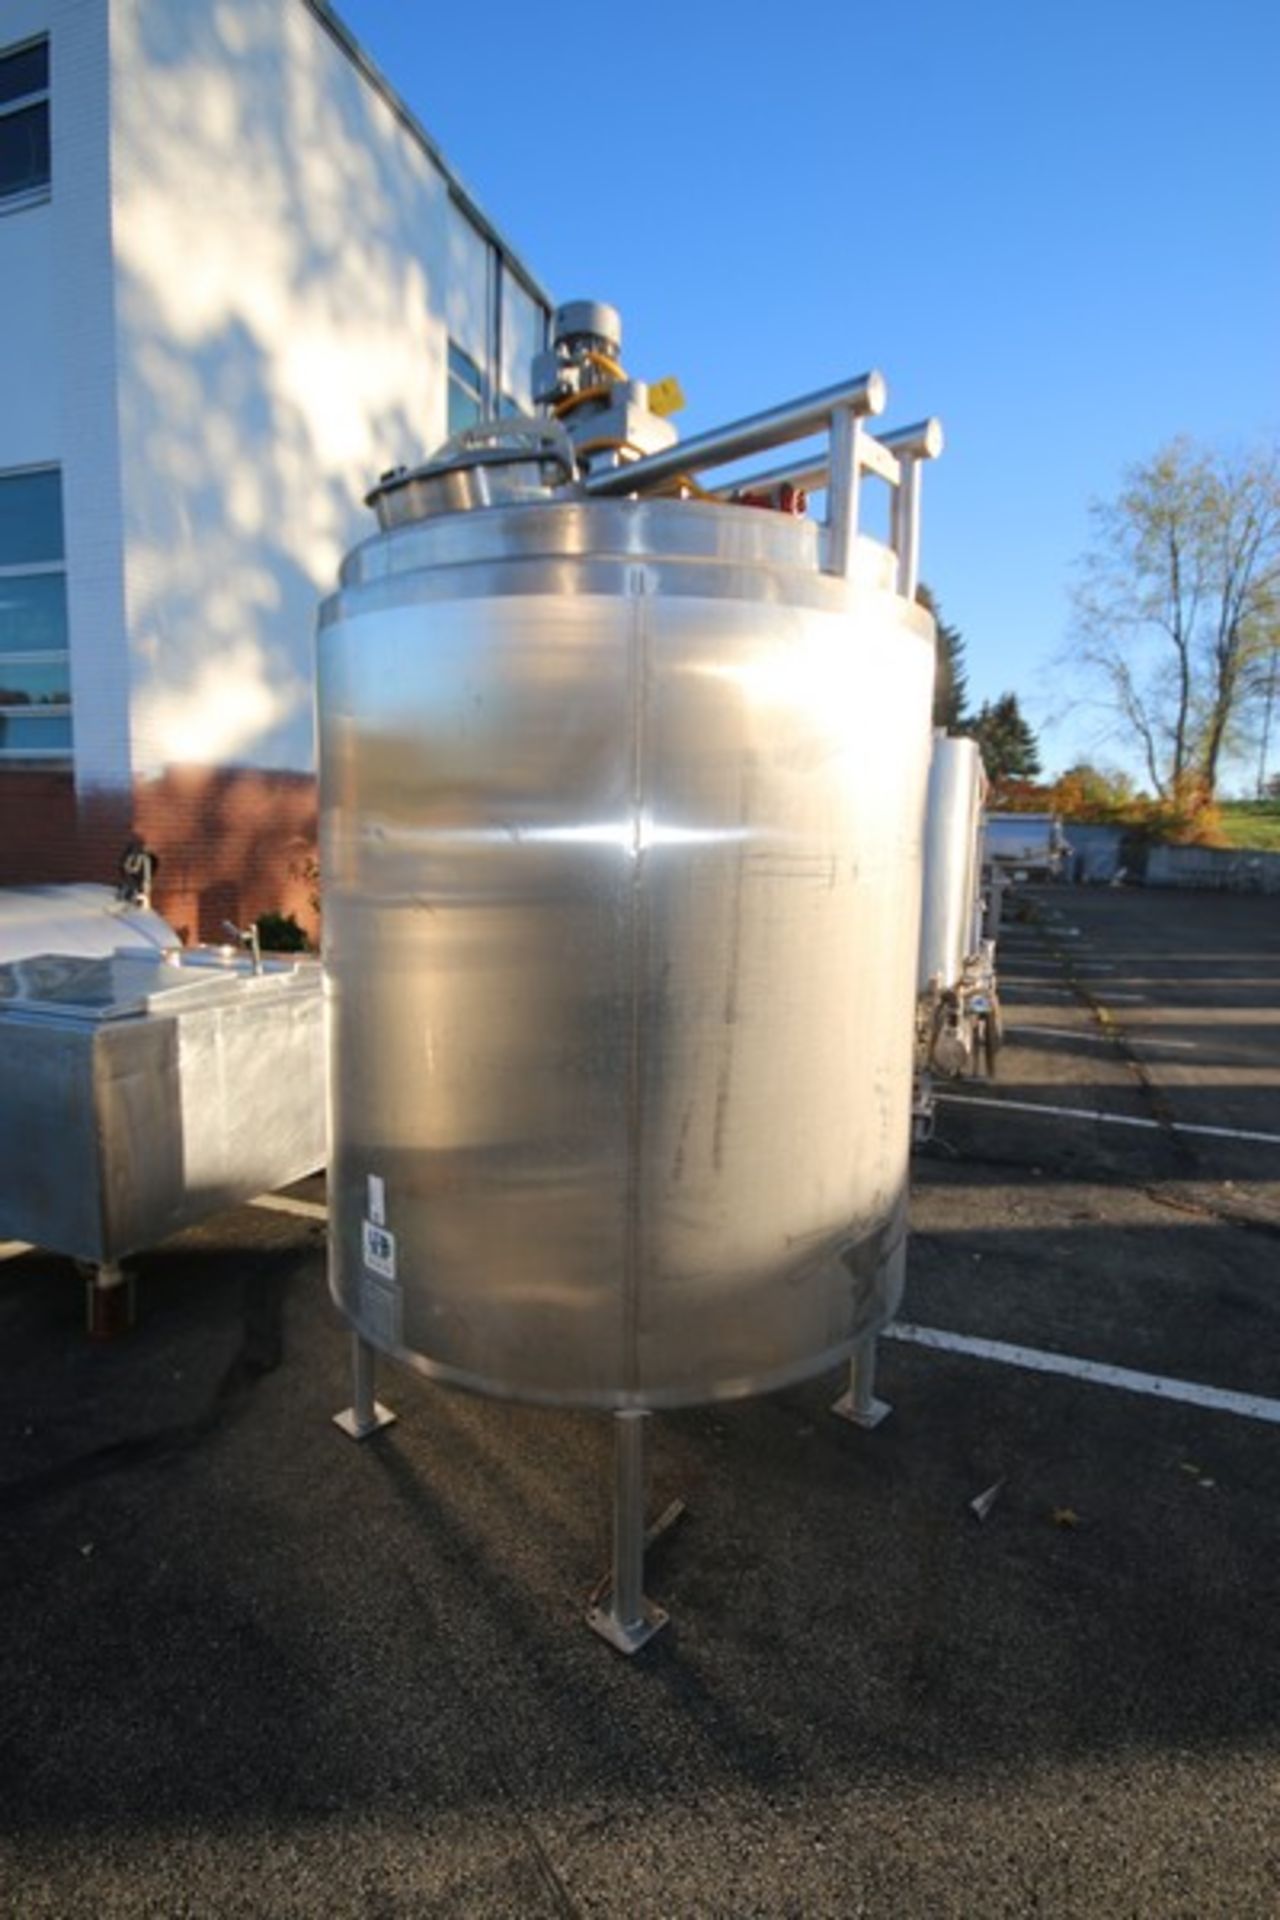 2015 A&B 600 Gal. Insulated Vertical S/S Mix Tank, M/N MIX TANK, S/N 1506690604, Mounted on S/S Legs - Image 2 of 11